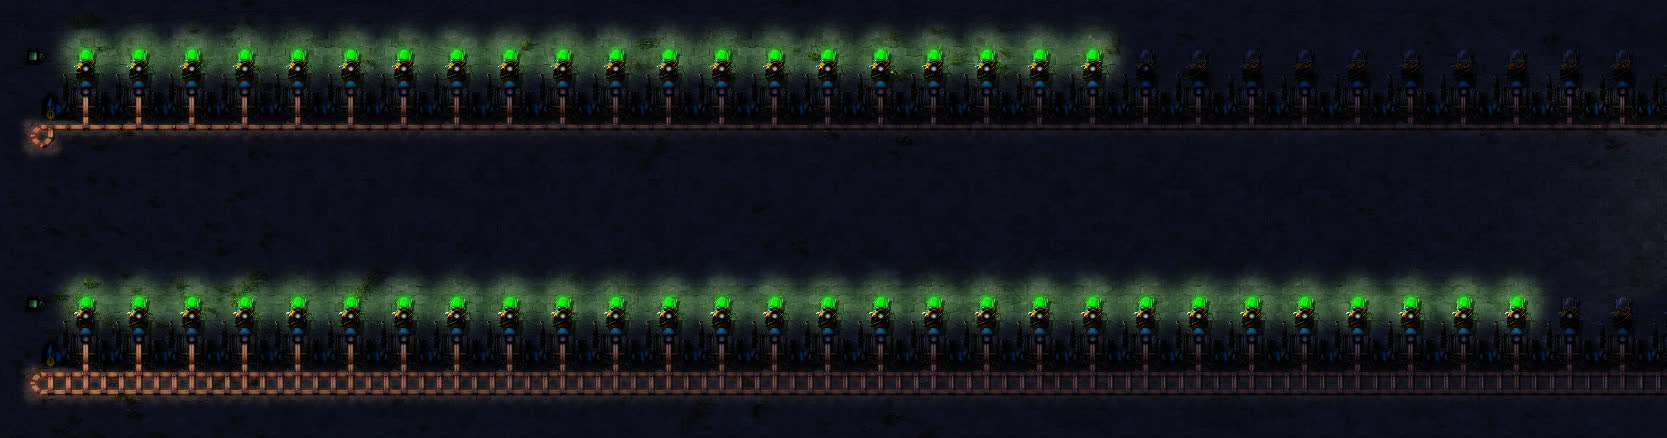 A row of heat pipes and green lights where every green light marks a heat exchanger at more than 500°C (meaning that it works). The glow of the heat pipes indicates temperature, with left ends being at the upper limit of 1000°C. As shown, making the heat pipes thicker allows supporting heat exchangers that are farther away.